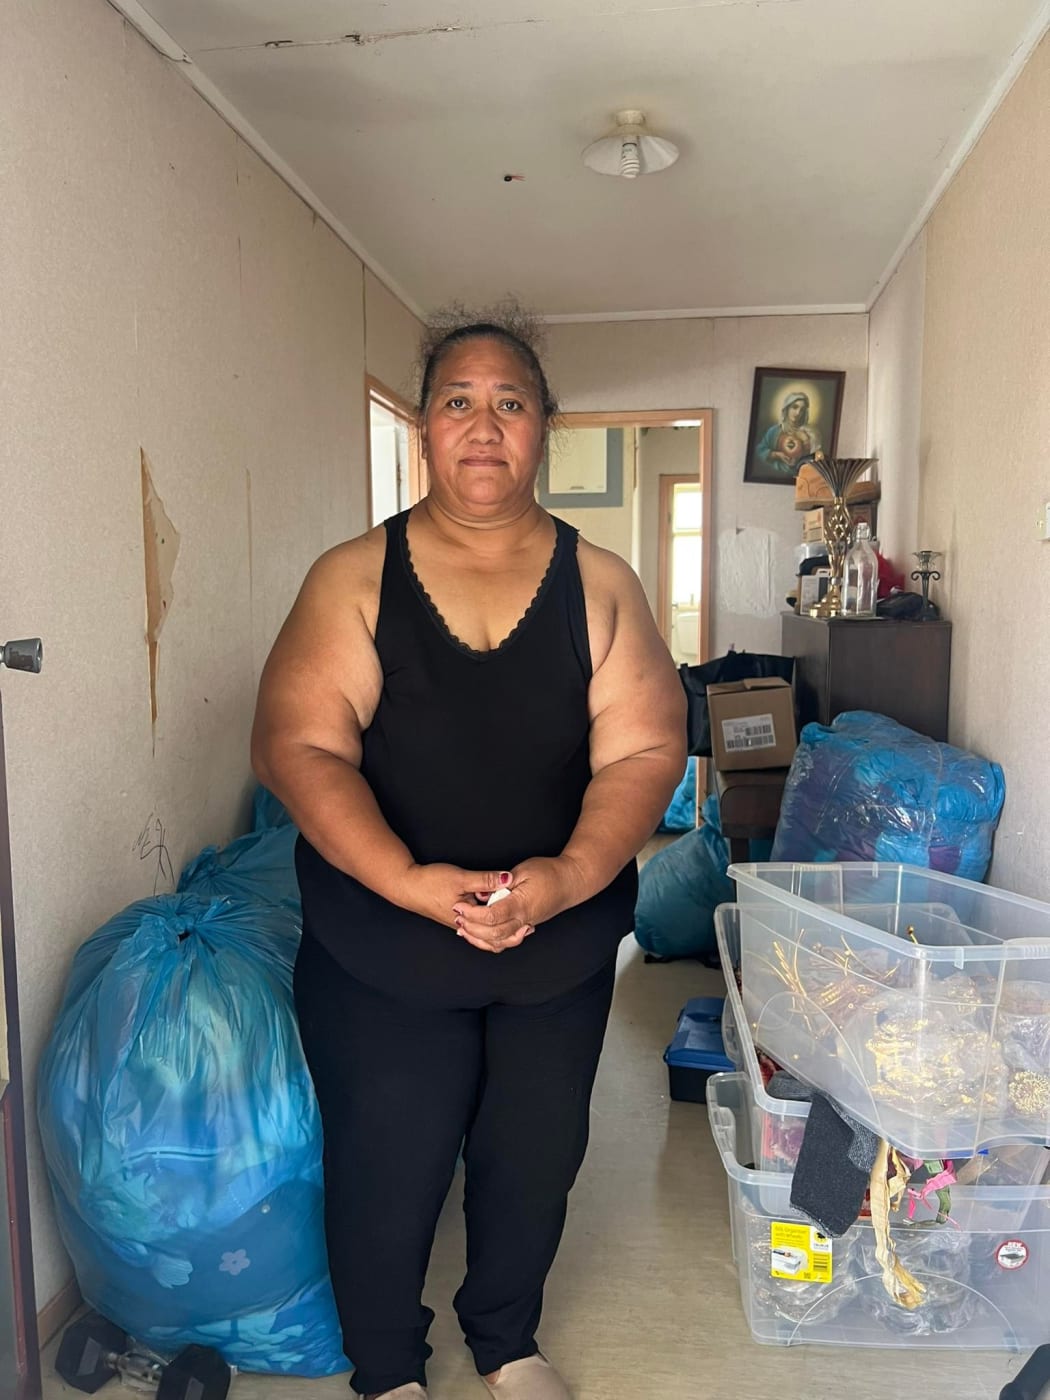 Mangere resident Mesalina at her flood-ravaged home looking for salvageable items